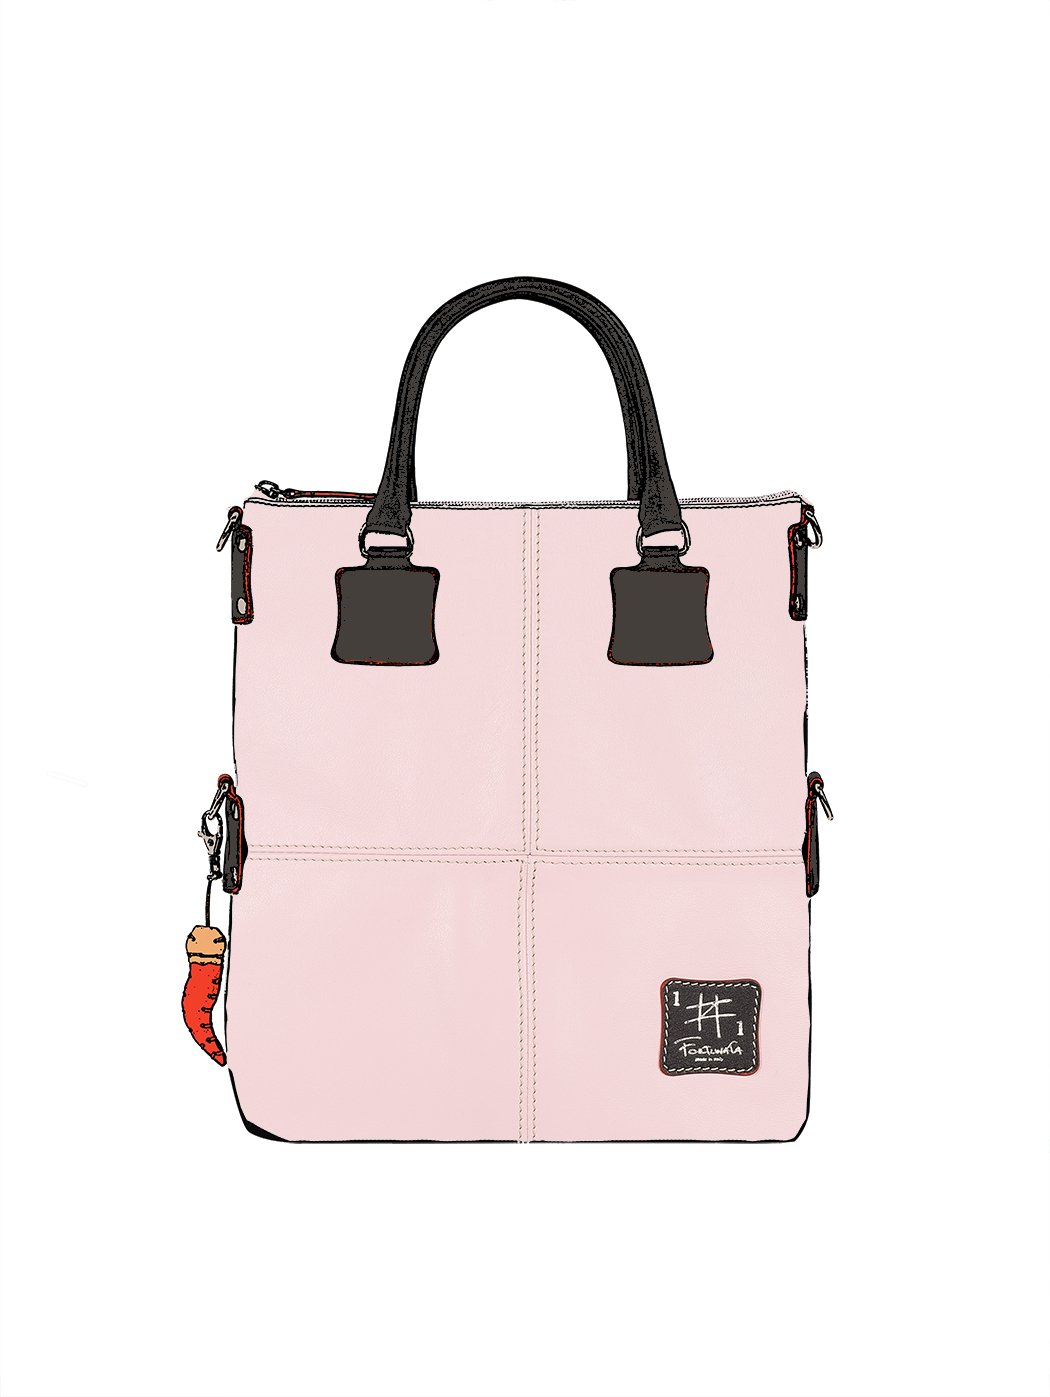 Large Tote Bag Leather Pink - Handmade in Italy